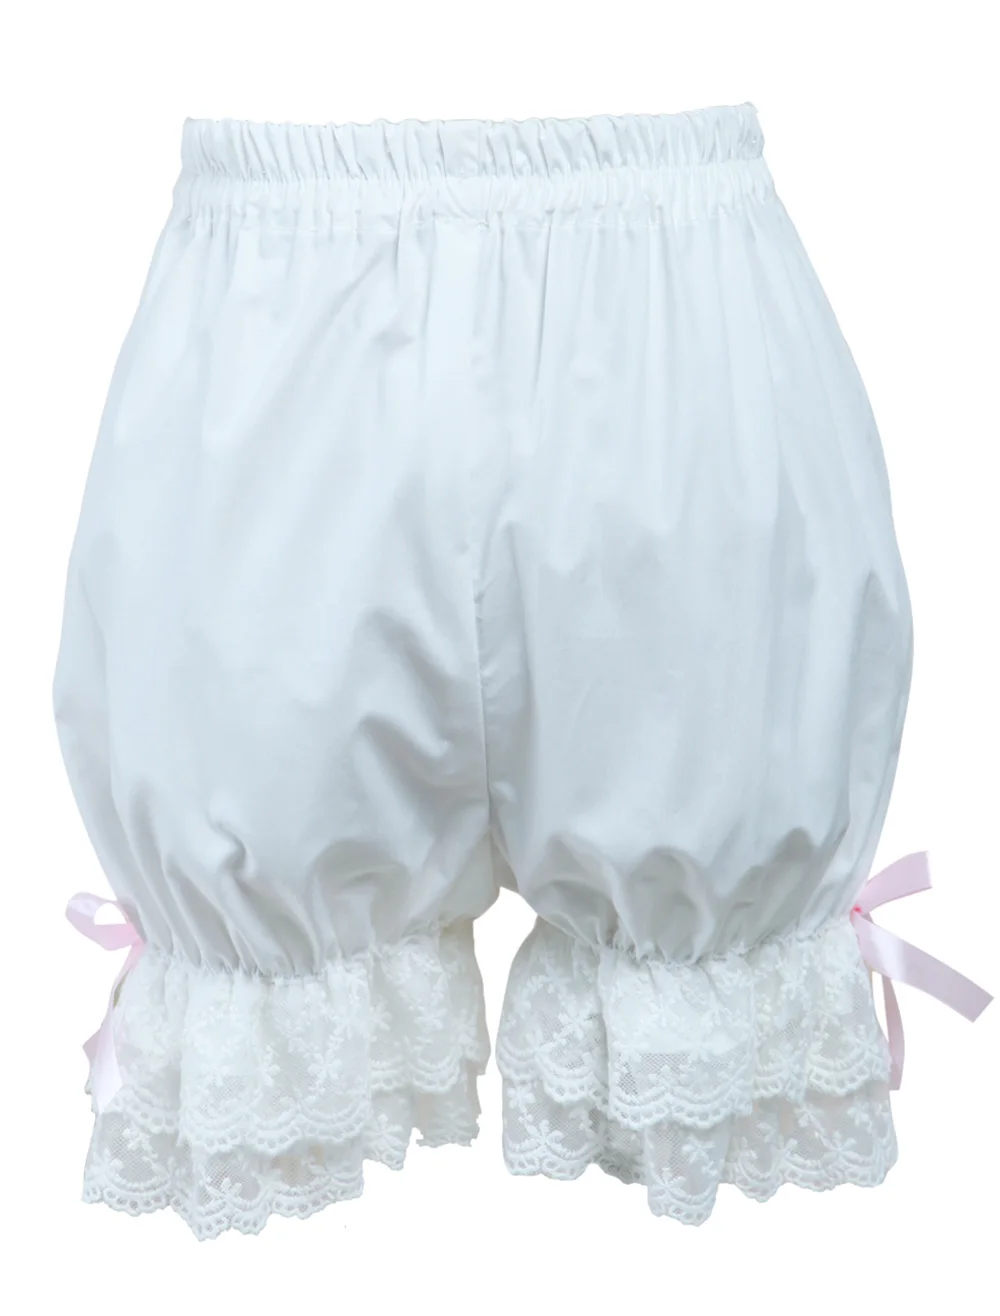 Girls White Sweet Loilita Bloomers School Students Lace Trim Shorts Bow Cotton Safety Under Pants